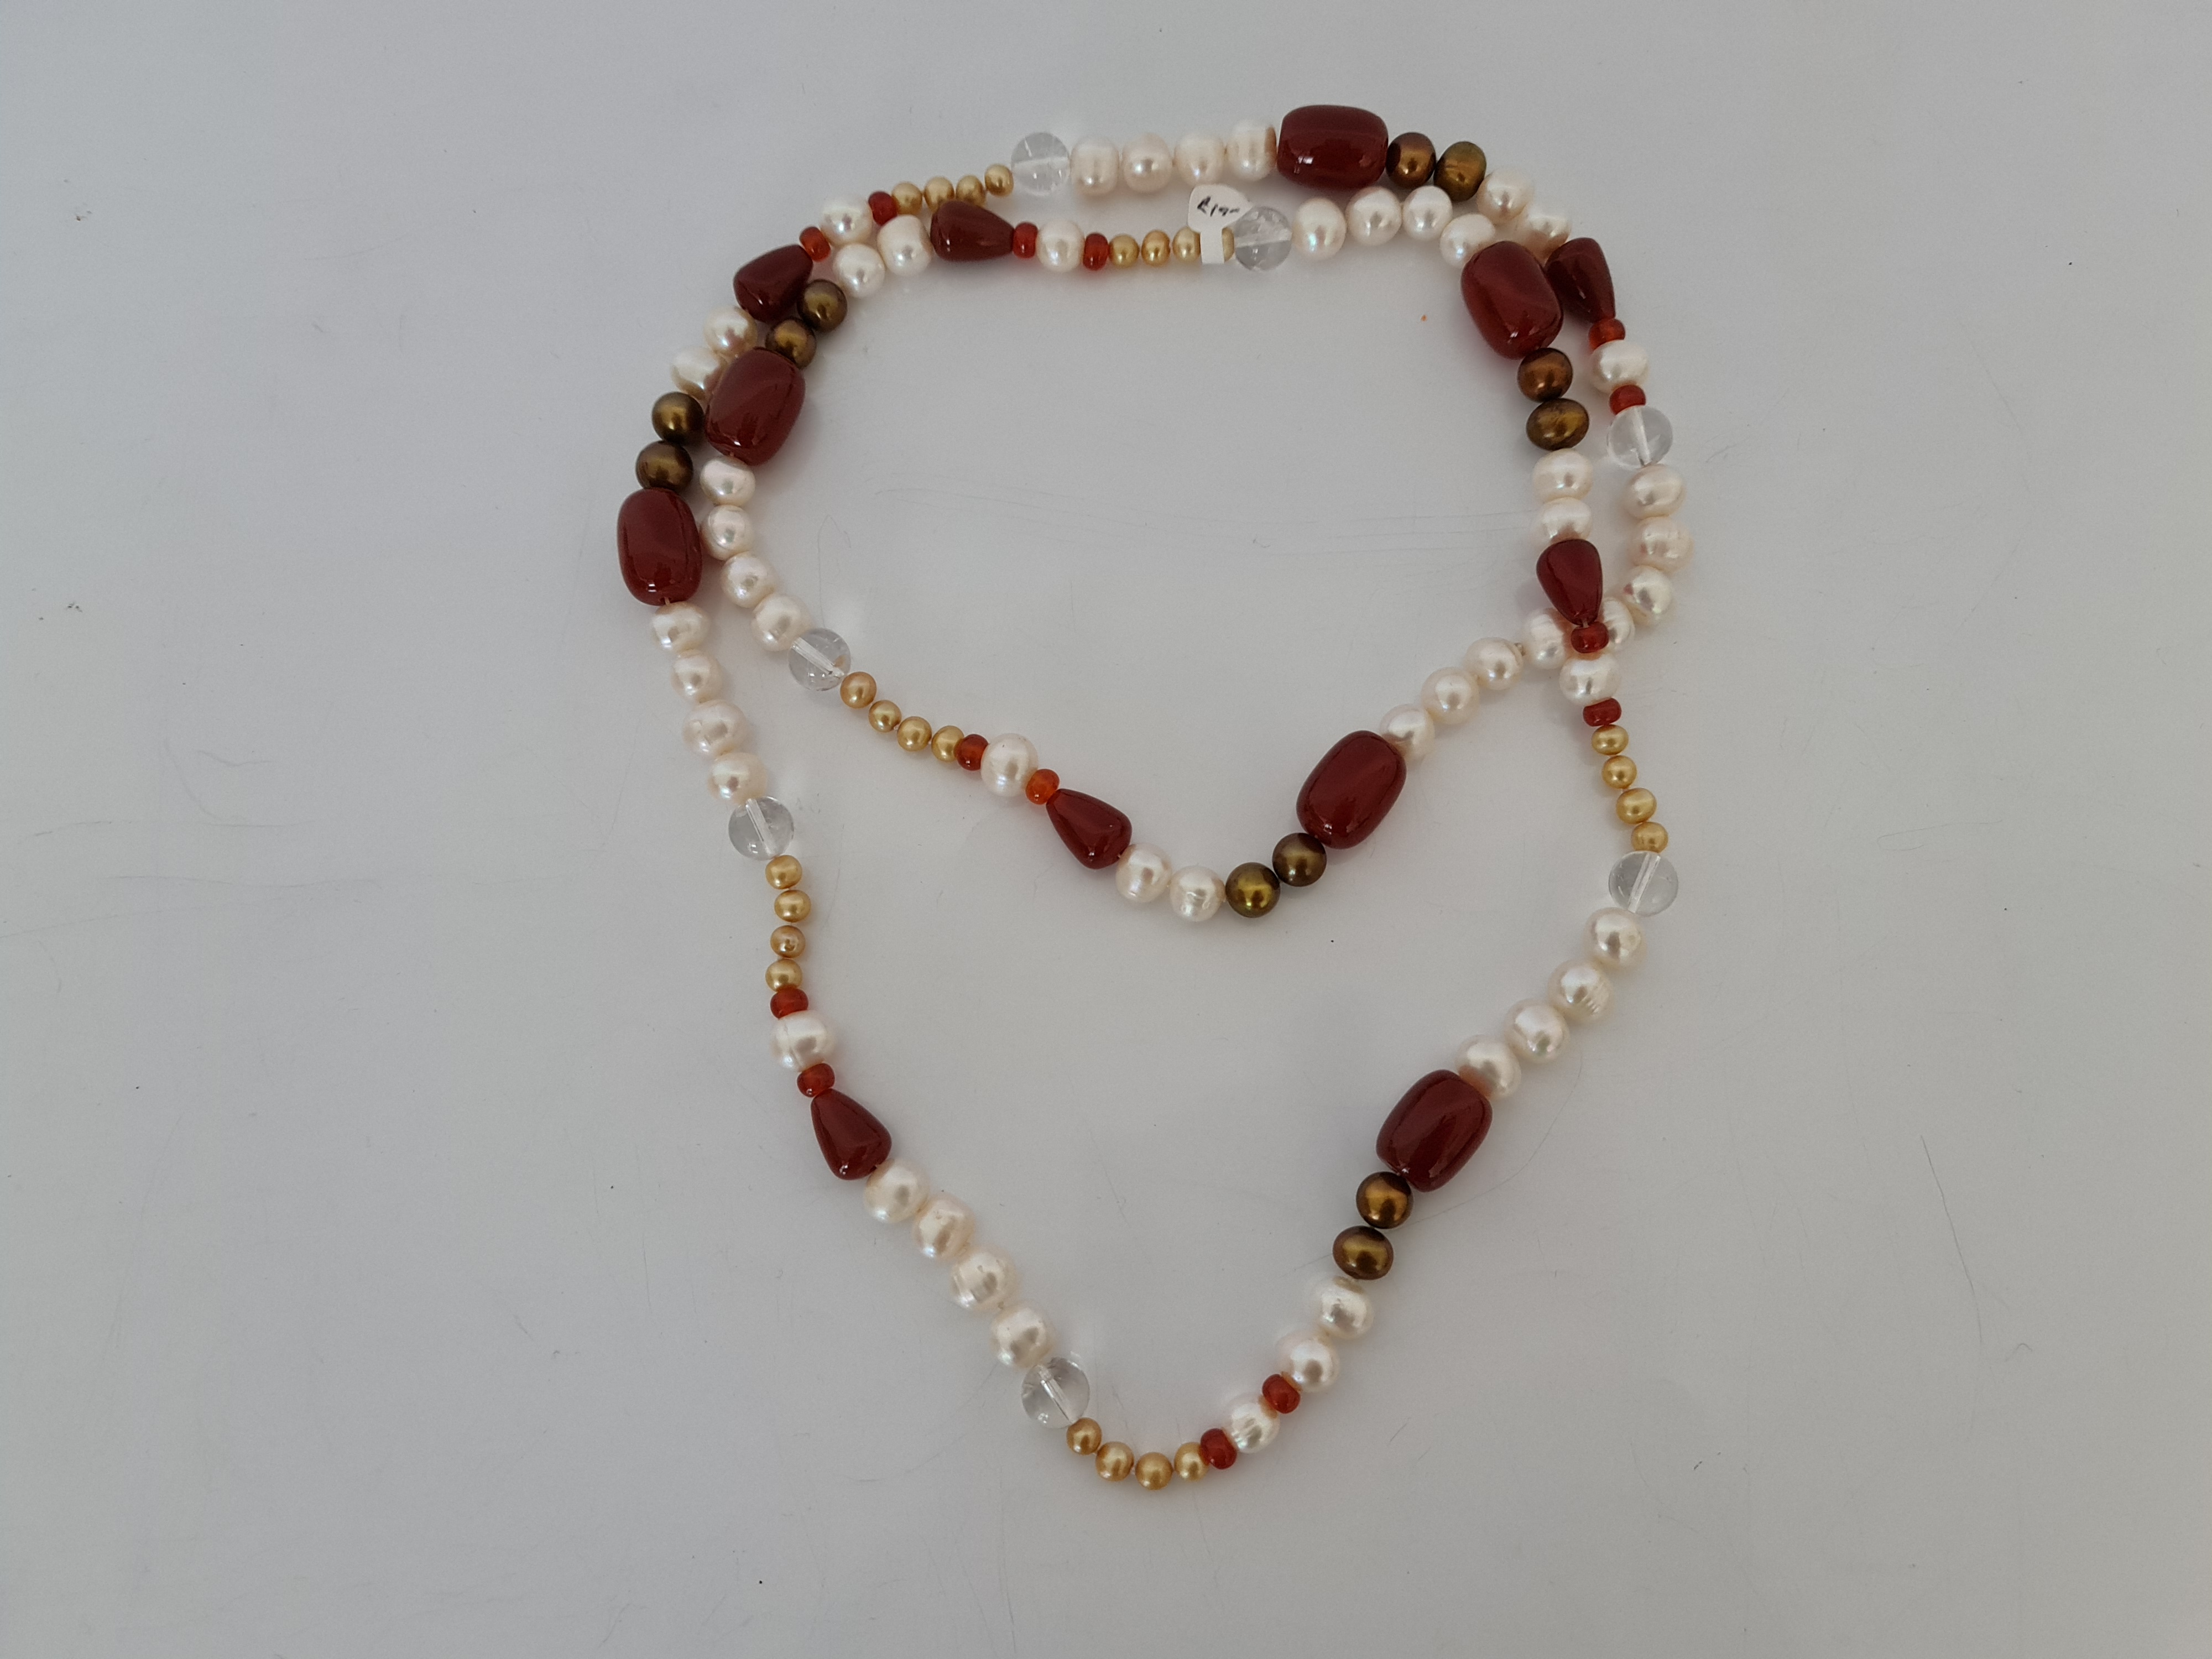 A string of cultured pearls, comprising white, brown and golden pearls, spaced by red hardstone